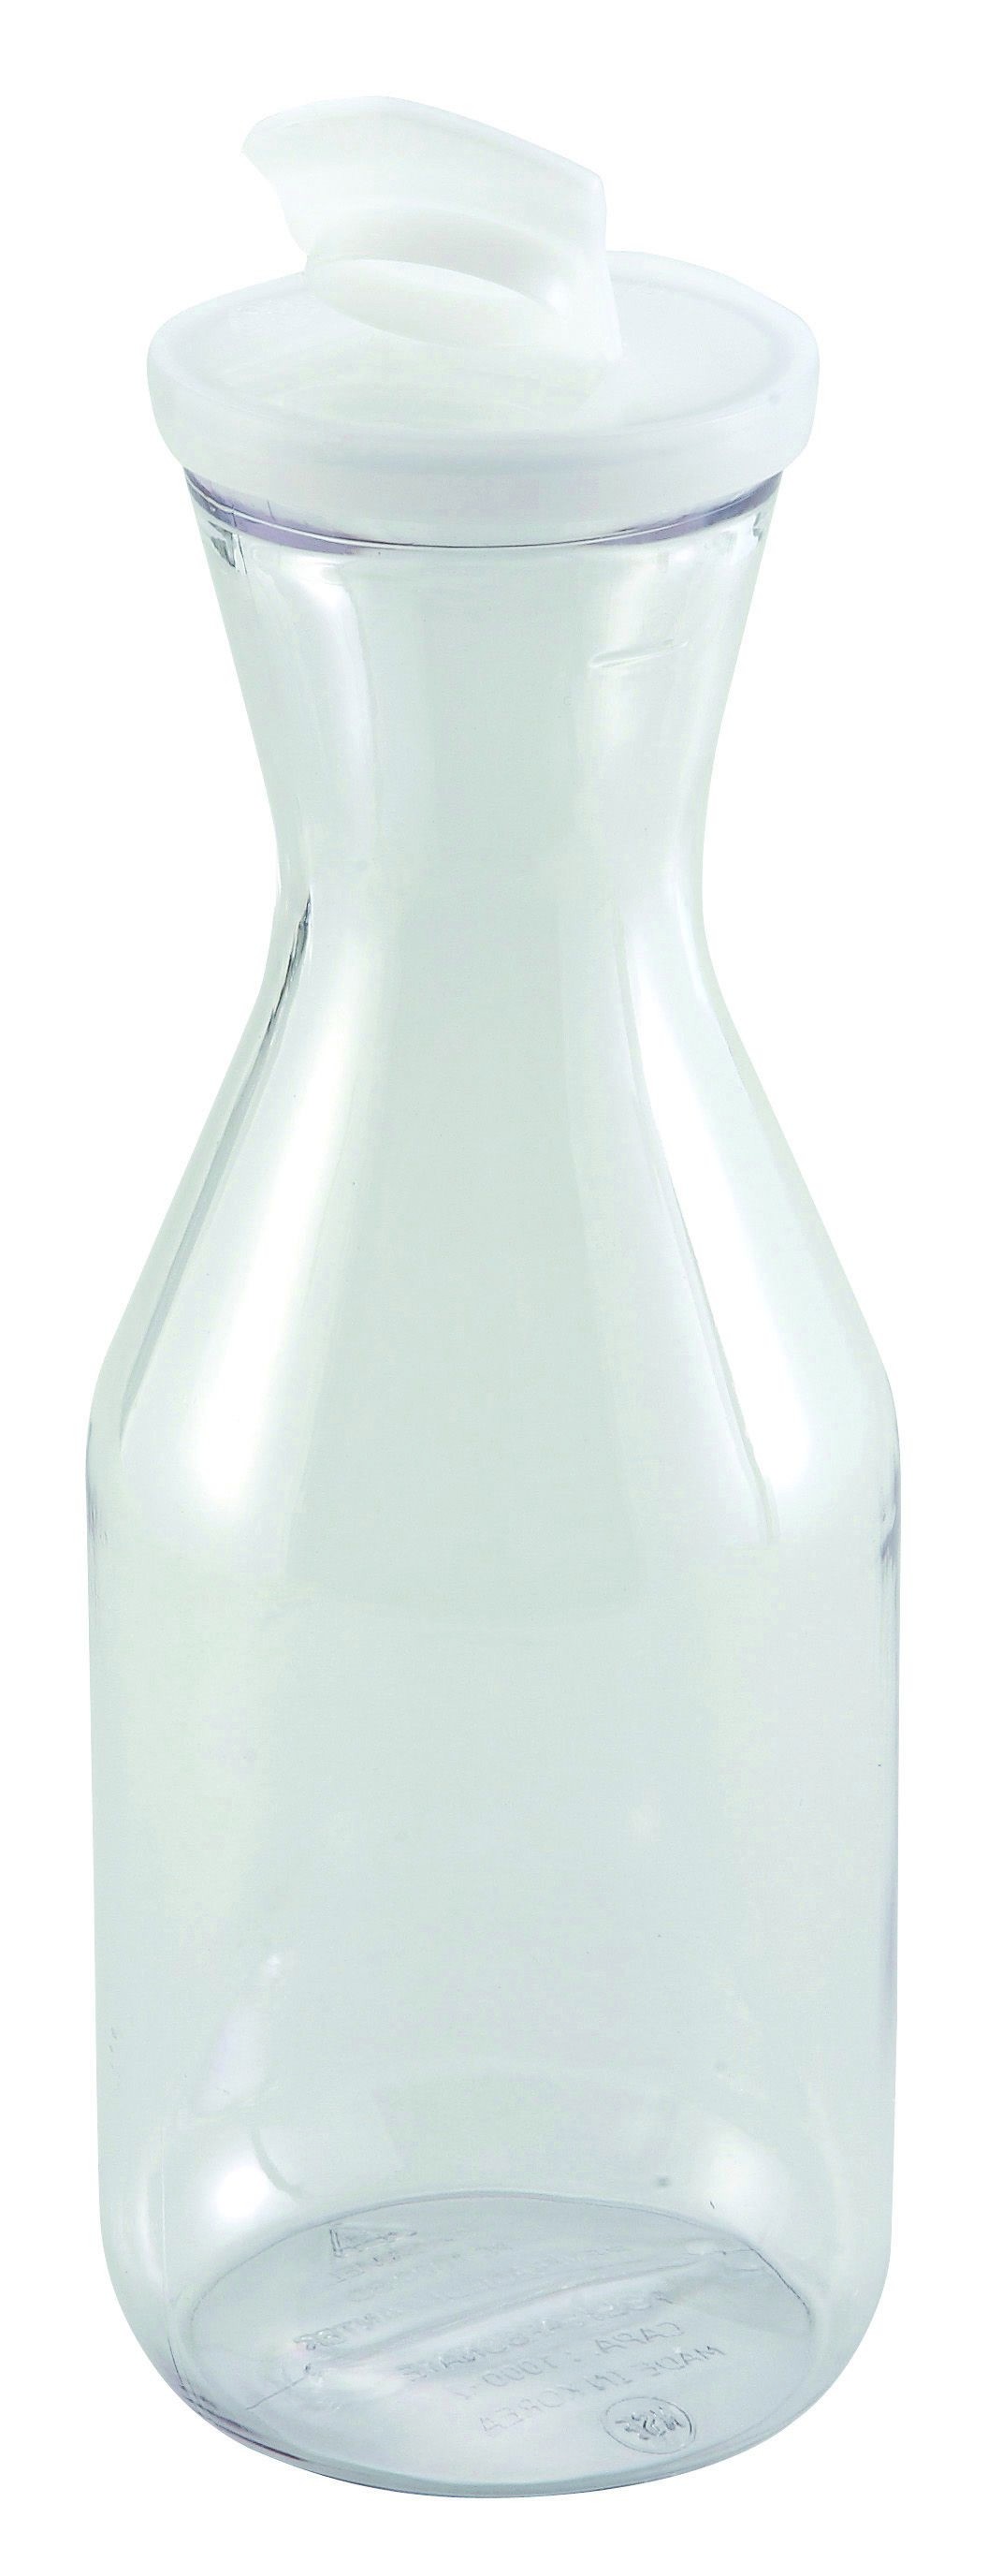 Winco PDT-15 Polycarbonate Decanter with Lid 1.5L